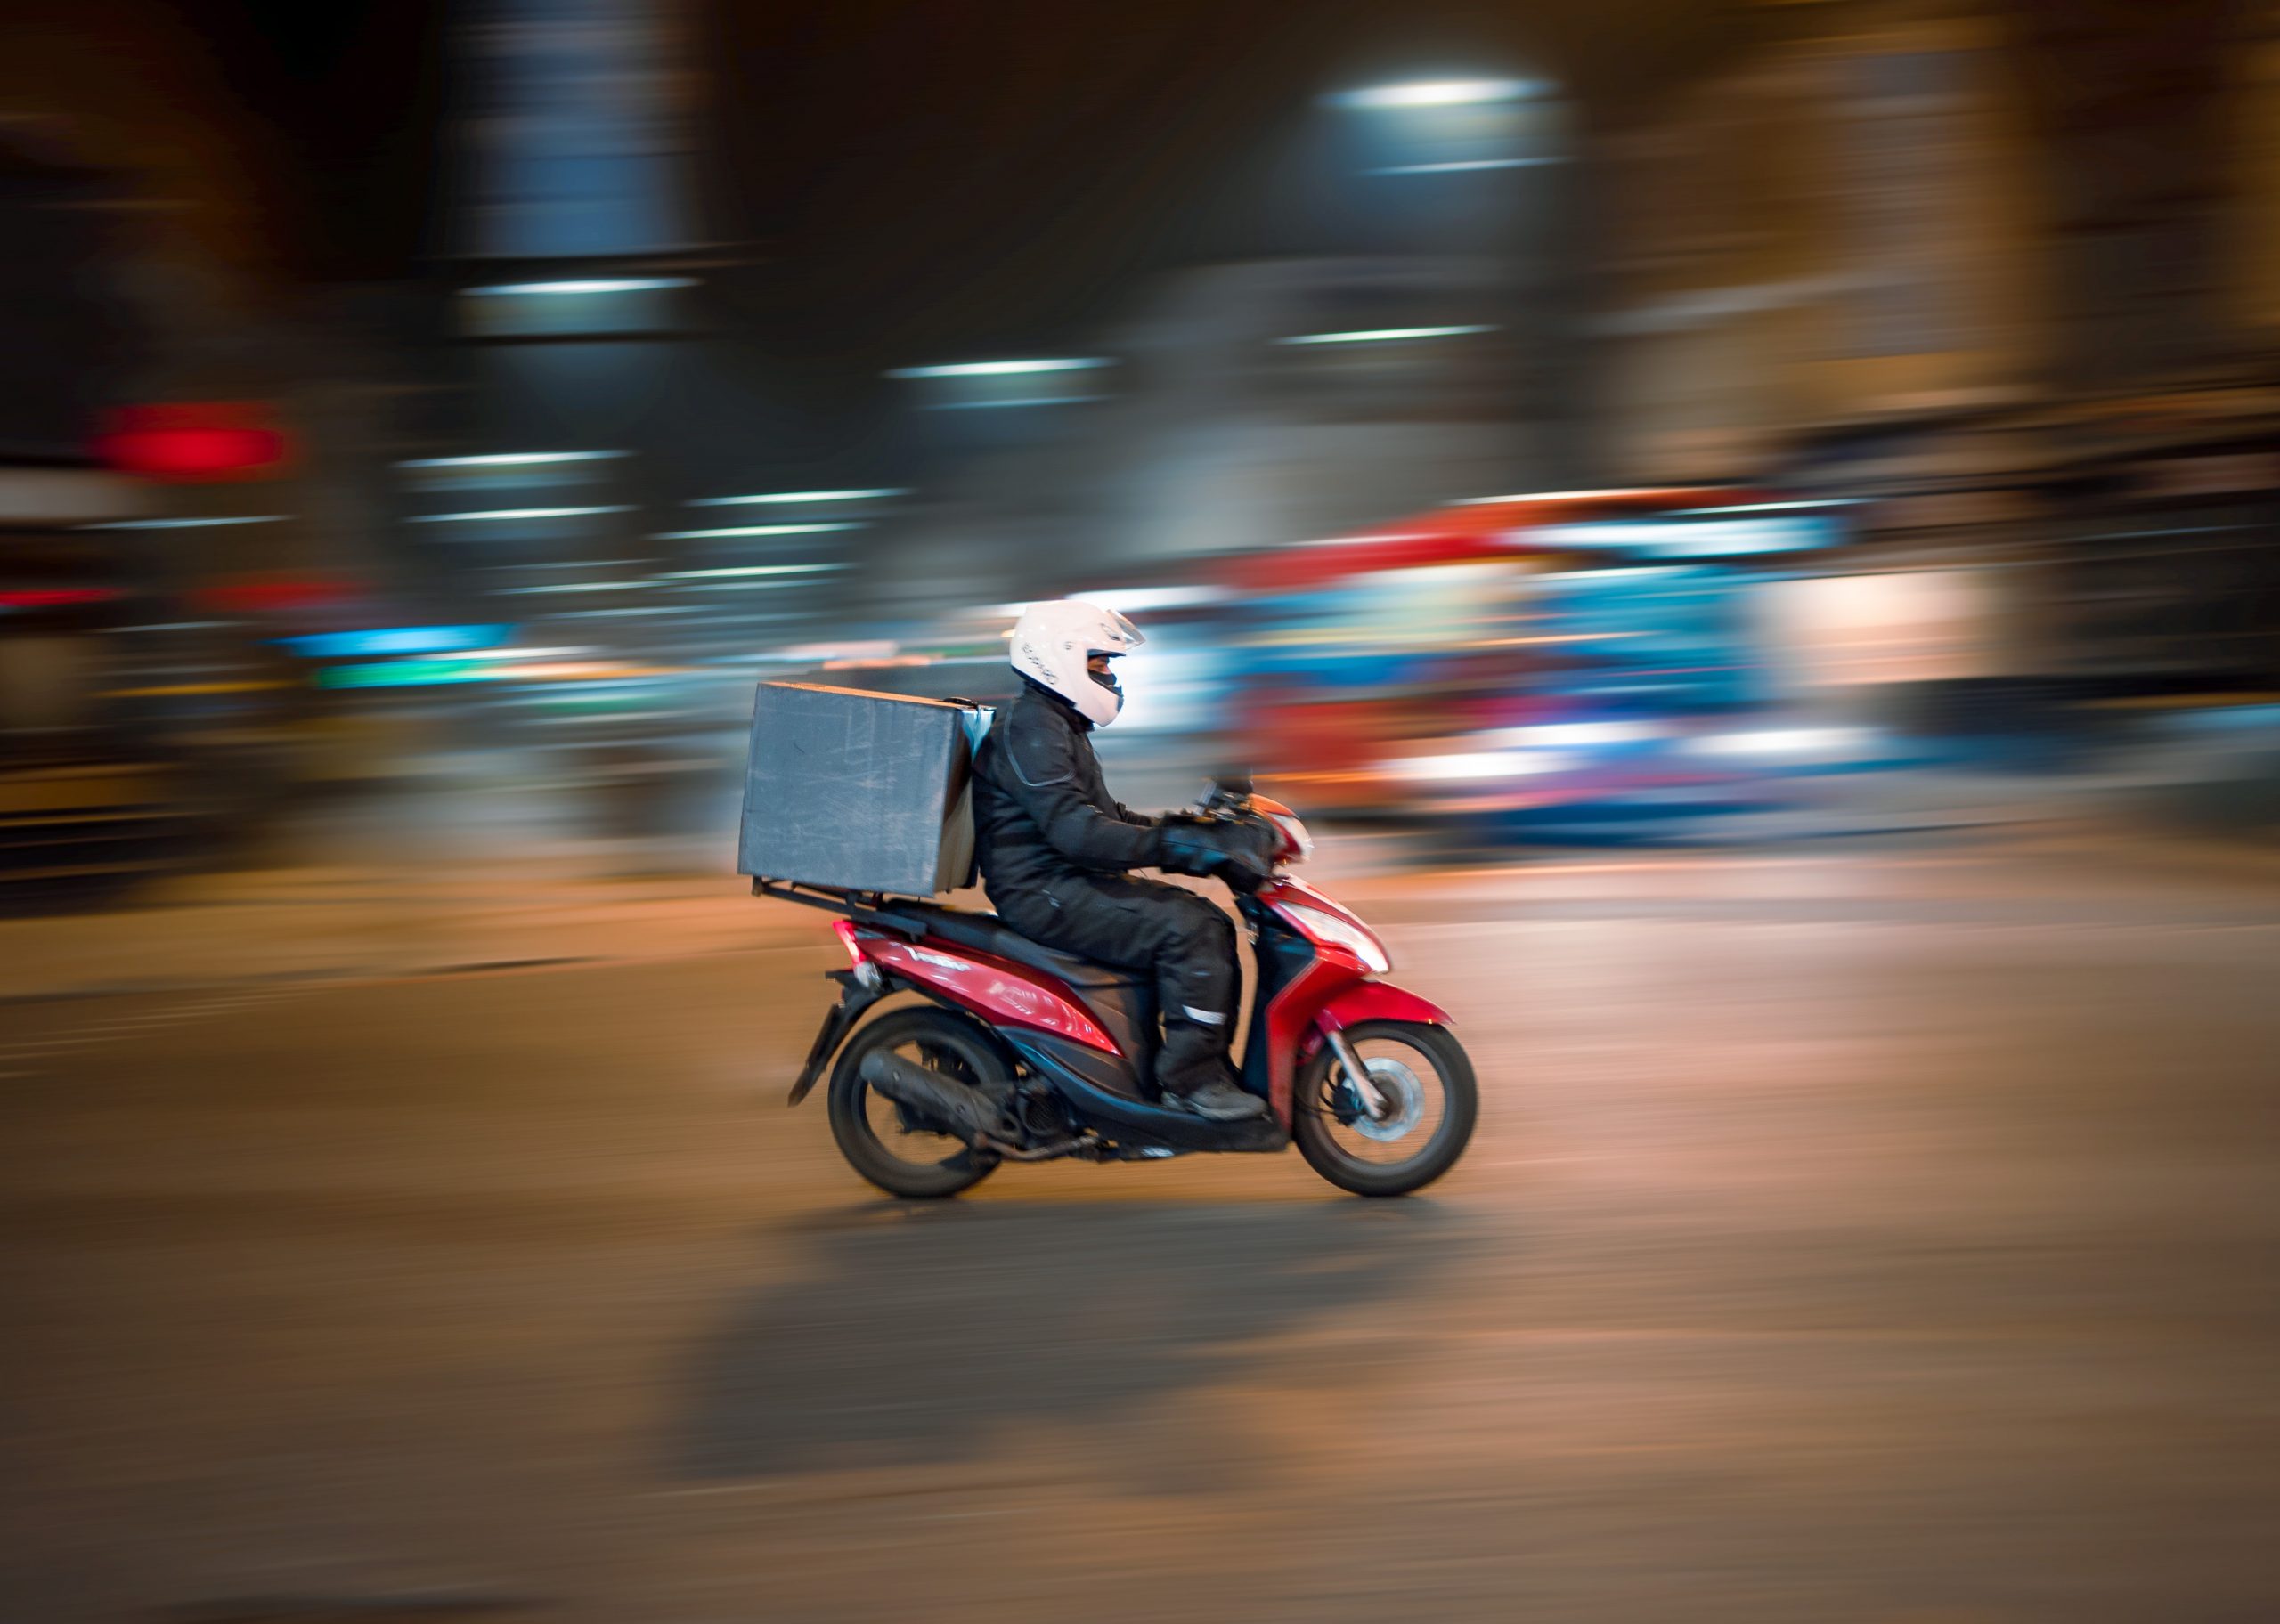 China imposes $533m fine on food delivery company Meituan